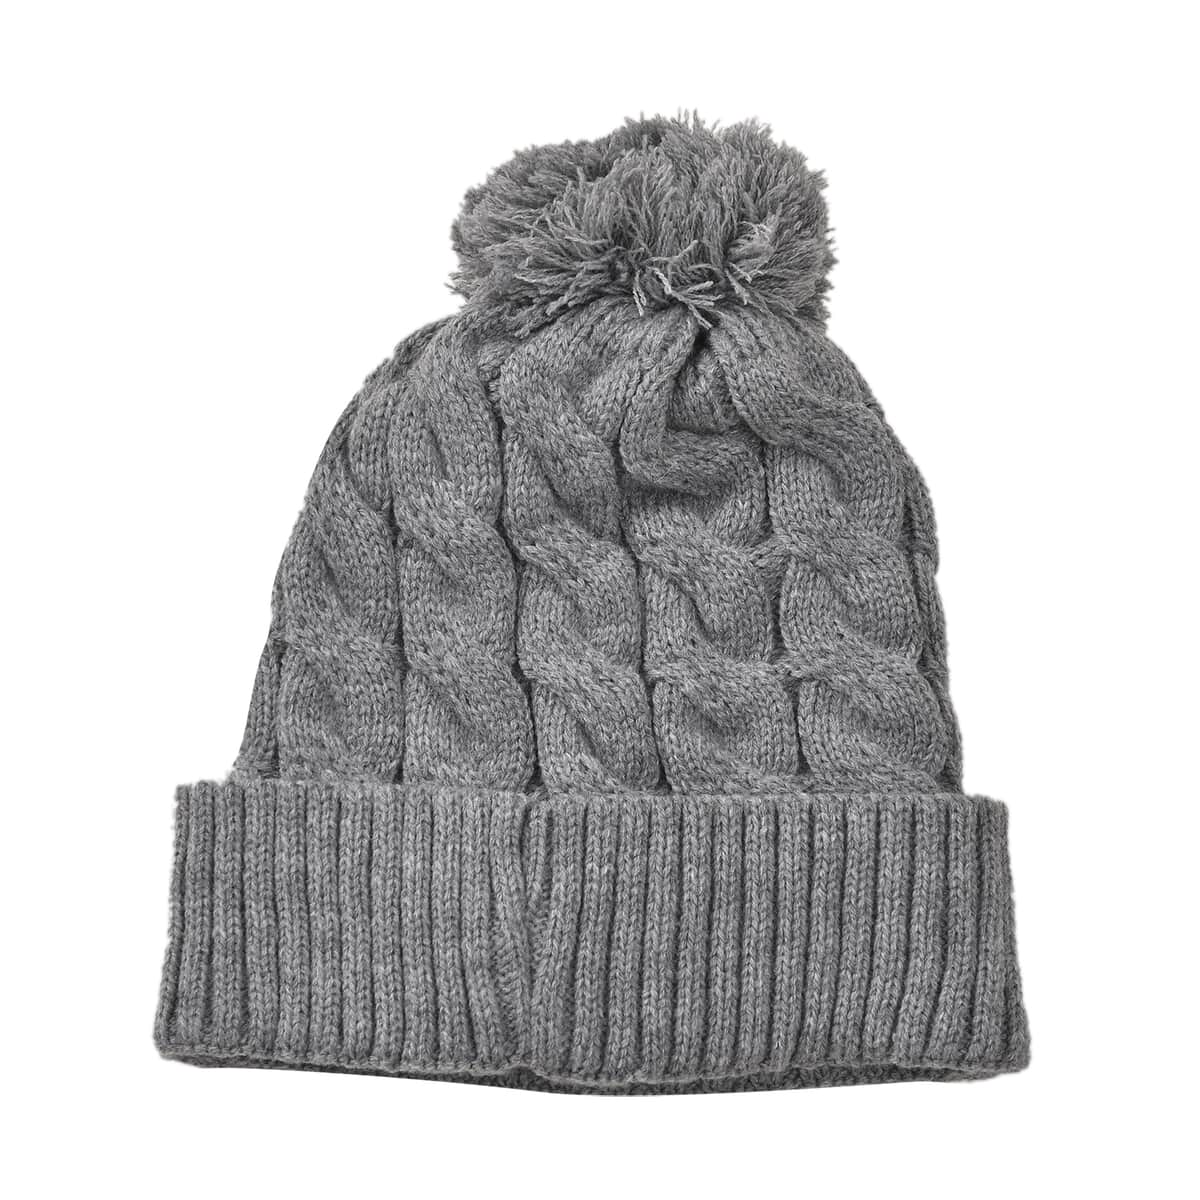 USB Rechargeable Waterproof LED Lighted Beanie Cap with Sherpa Lining and with Faux fur Bubble - Gray image number 5